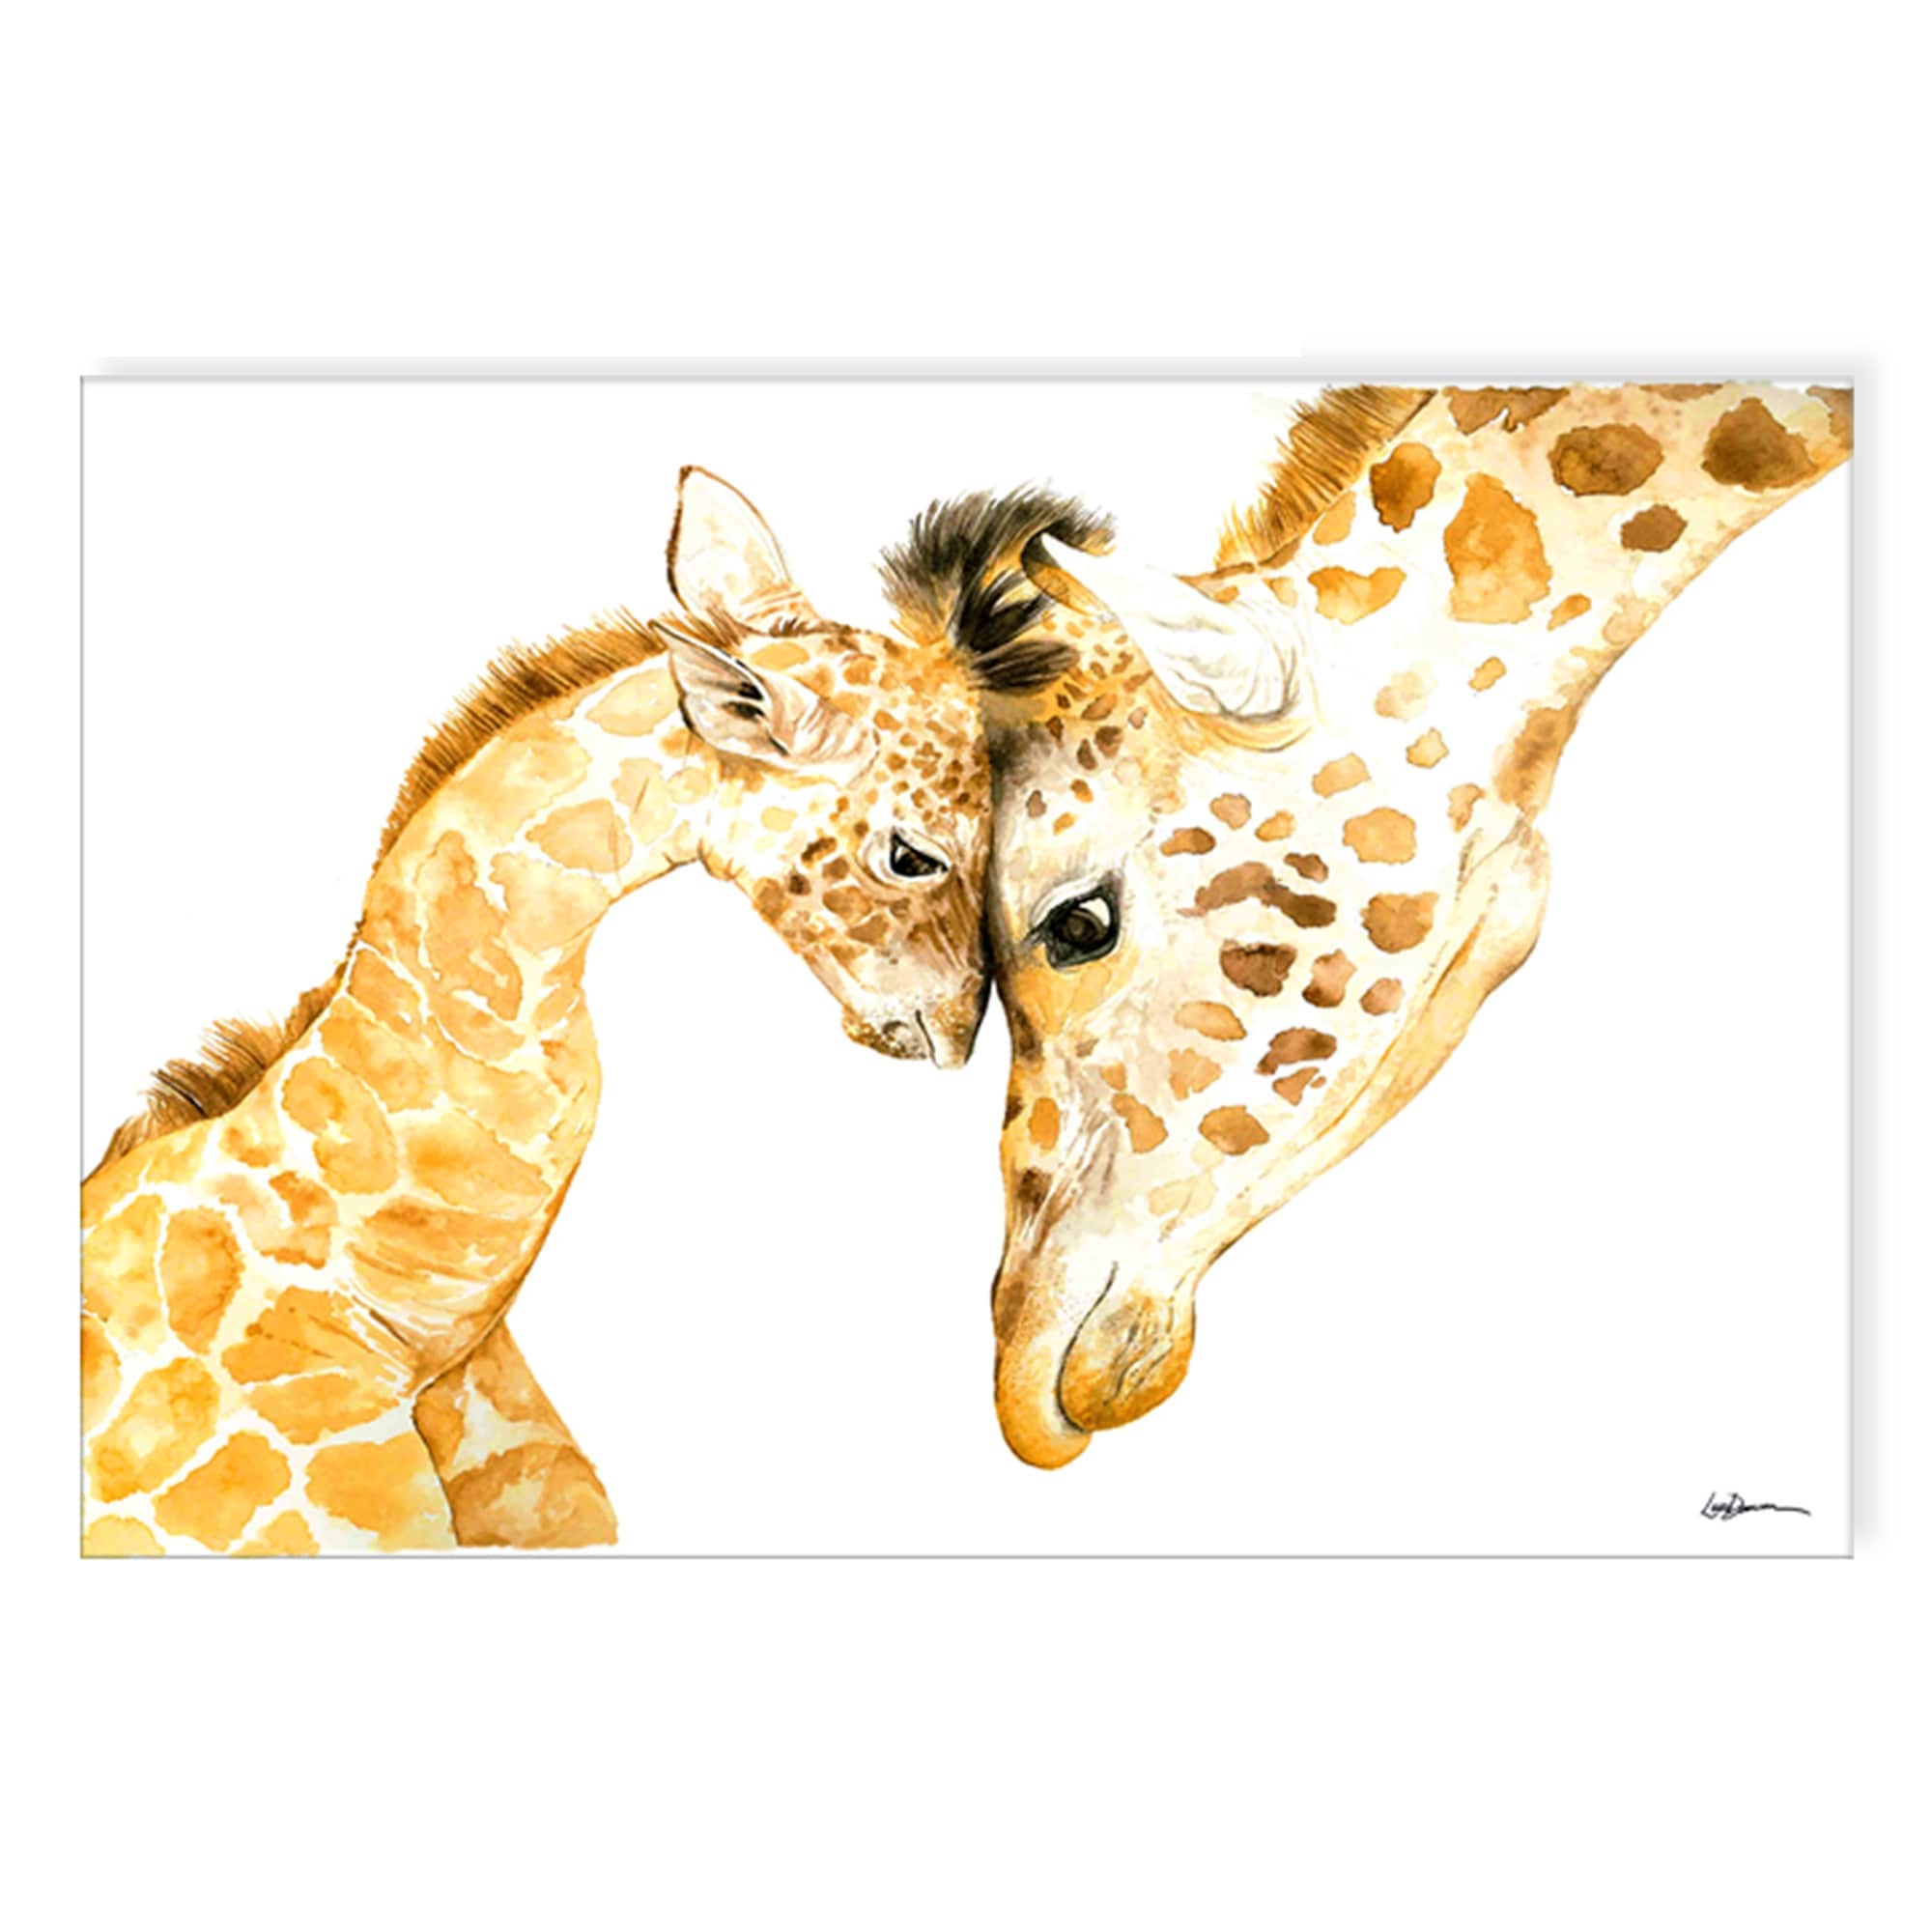 Giraffe And Baby Decorative Tile Unique Animal Gifts Giraffe And Baby Ceramic Tile Giraffe Lover Gift